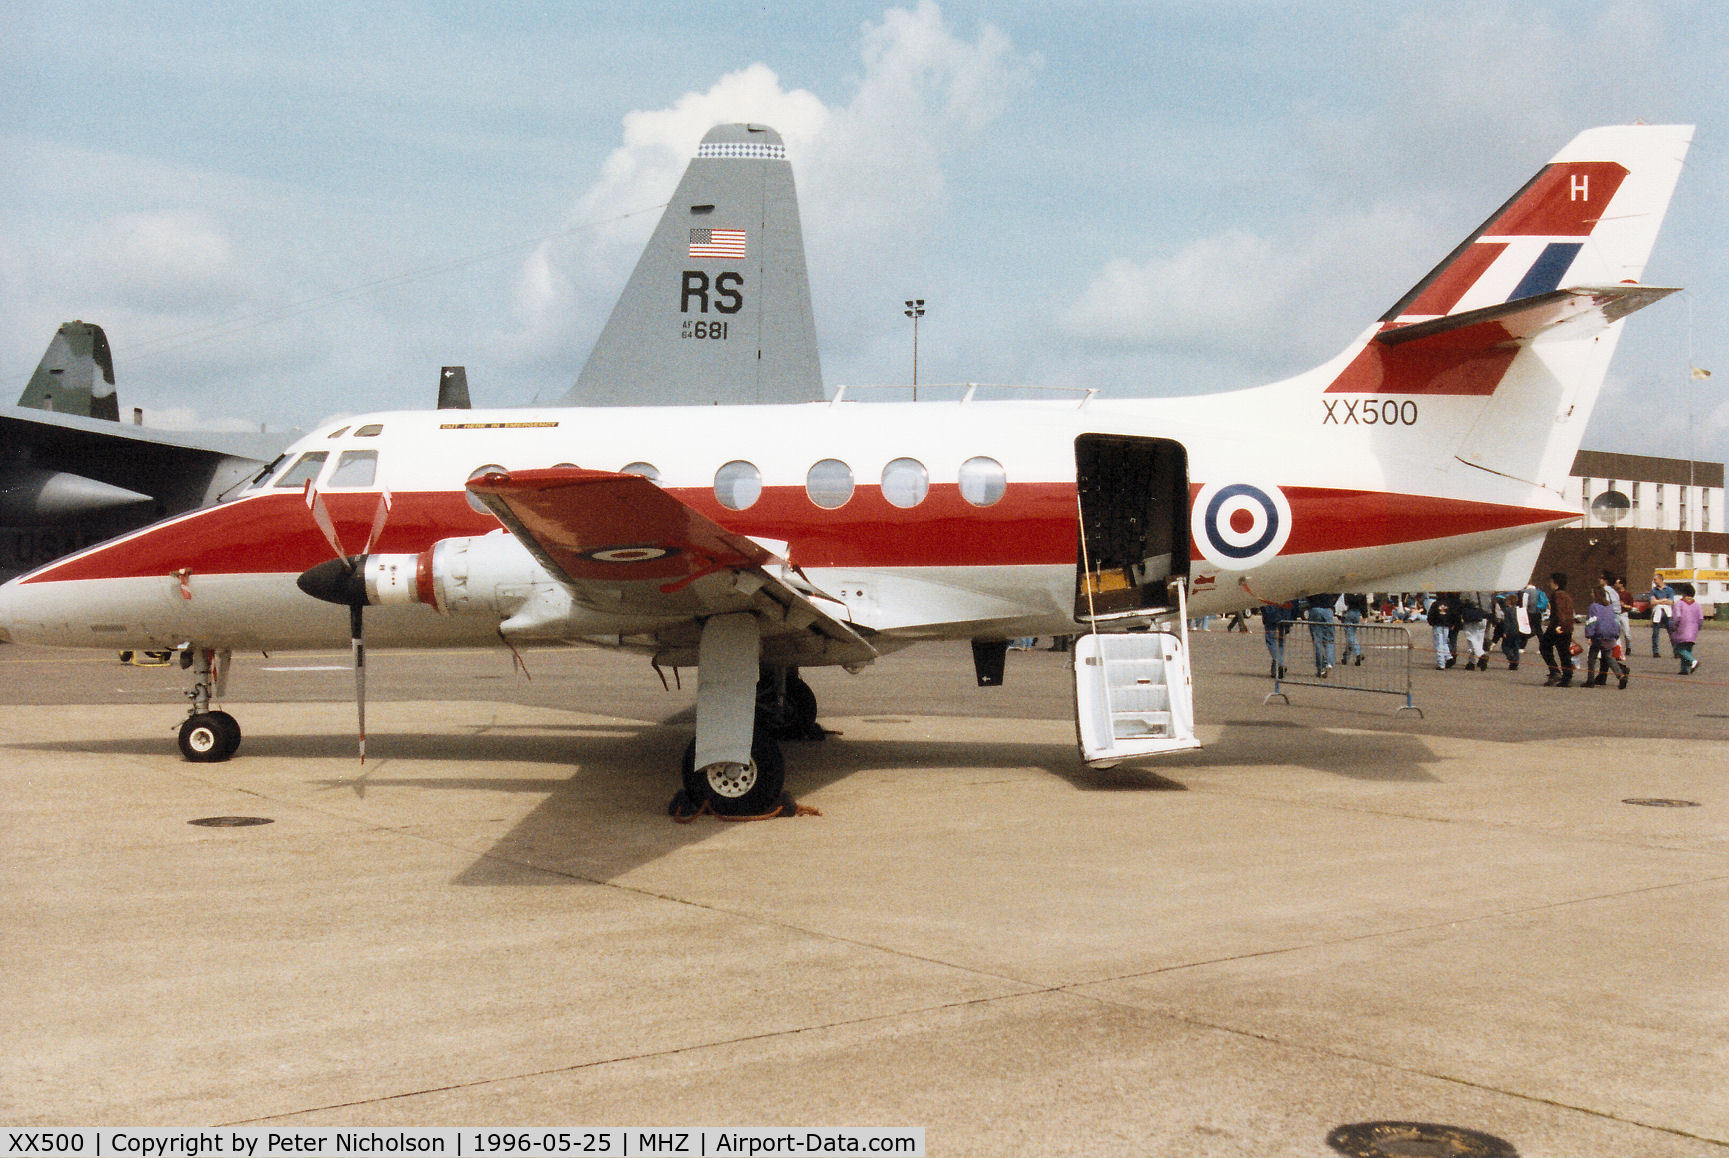 XX500, 1976 Scottish Aviation HP-137 Jetstream T.1 C/N 426, Jetstream T.1 of 45[Reserve] Squadron at RAF Finningley on display at the 1996 RAF Mildenhall Air Fete.